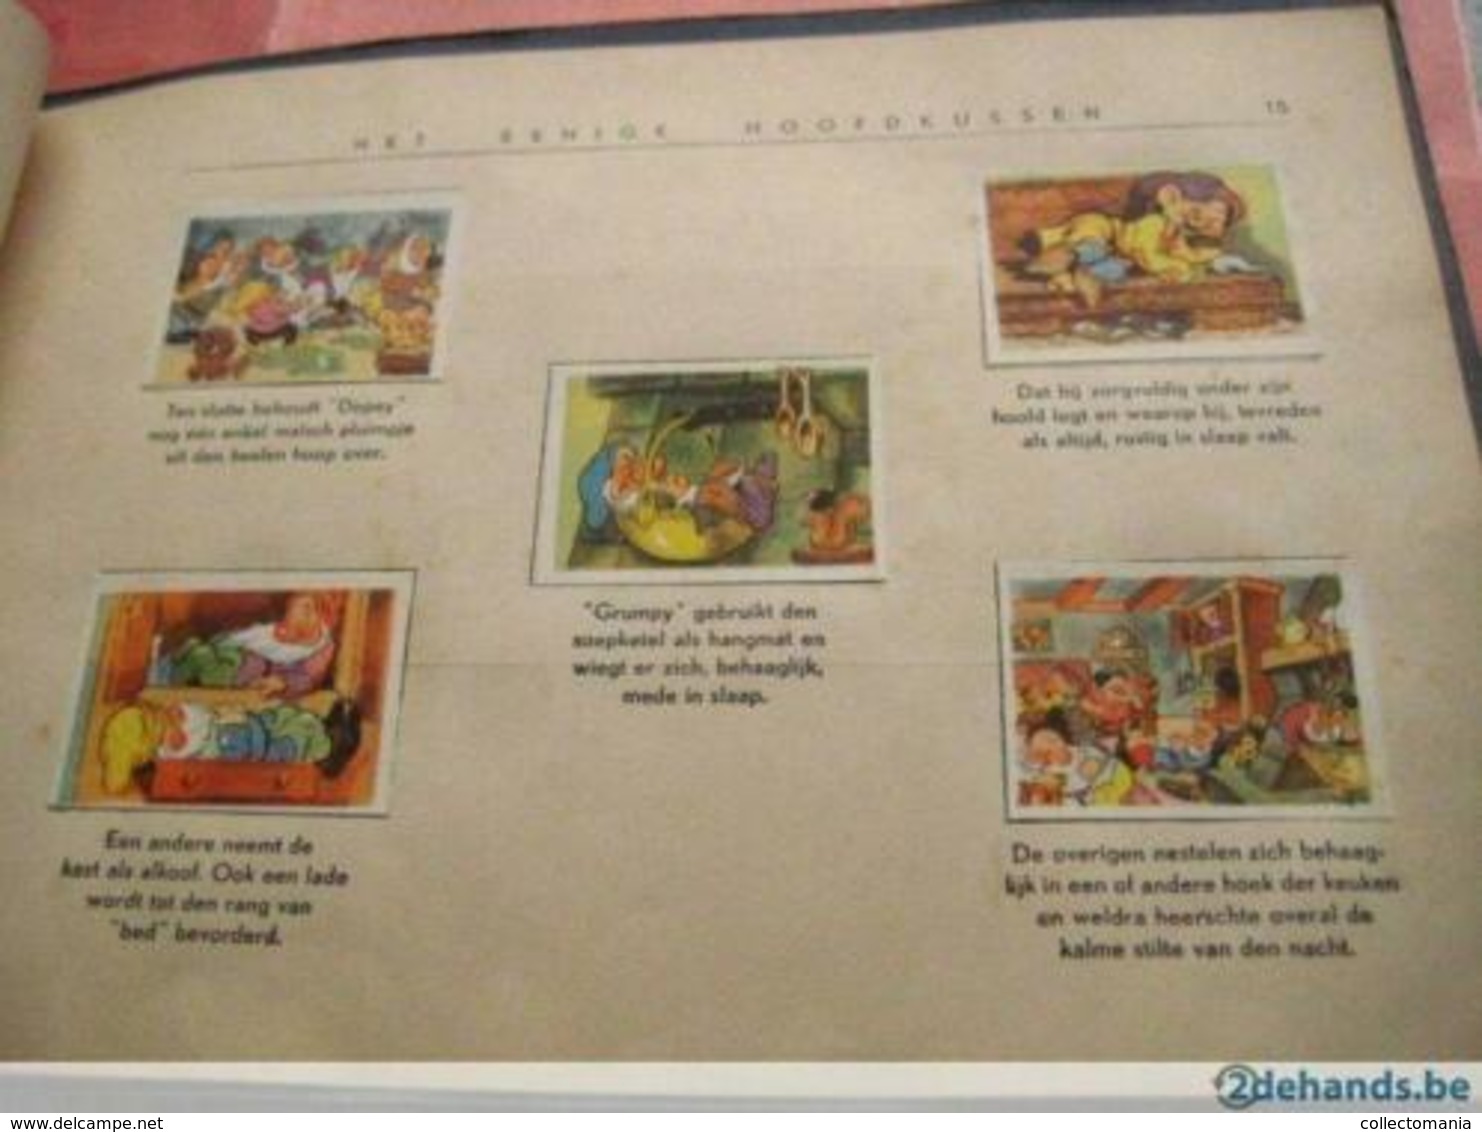 only dwarfs and animals Snow White Disney album, with full set fairy tale animation movie 1938,  50 chromos RARE to find